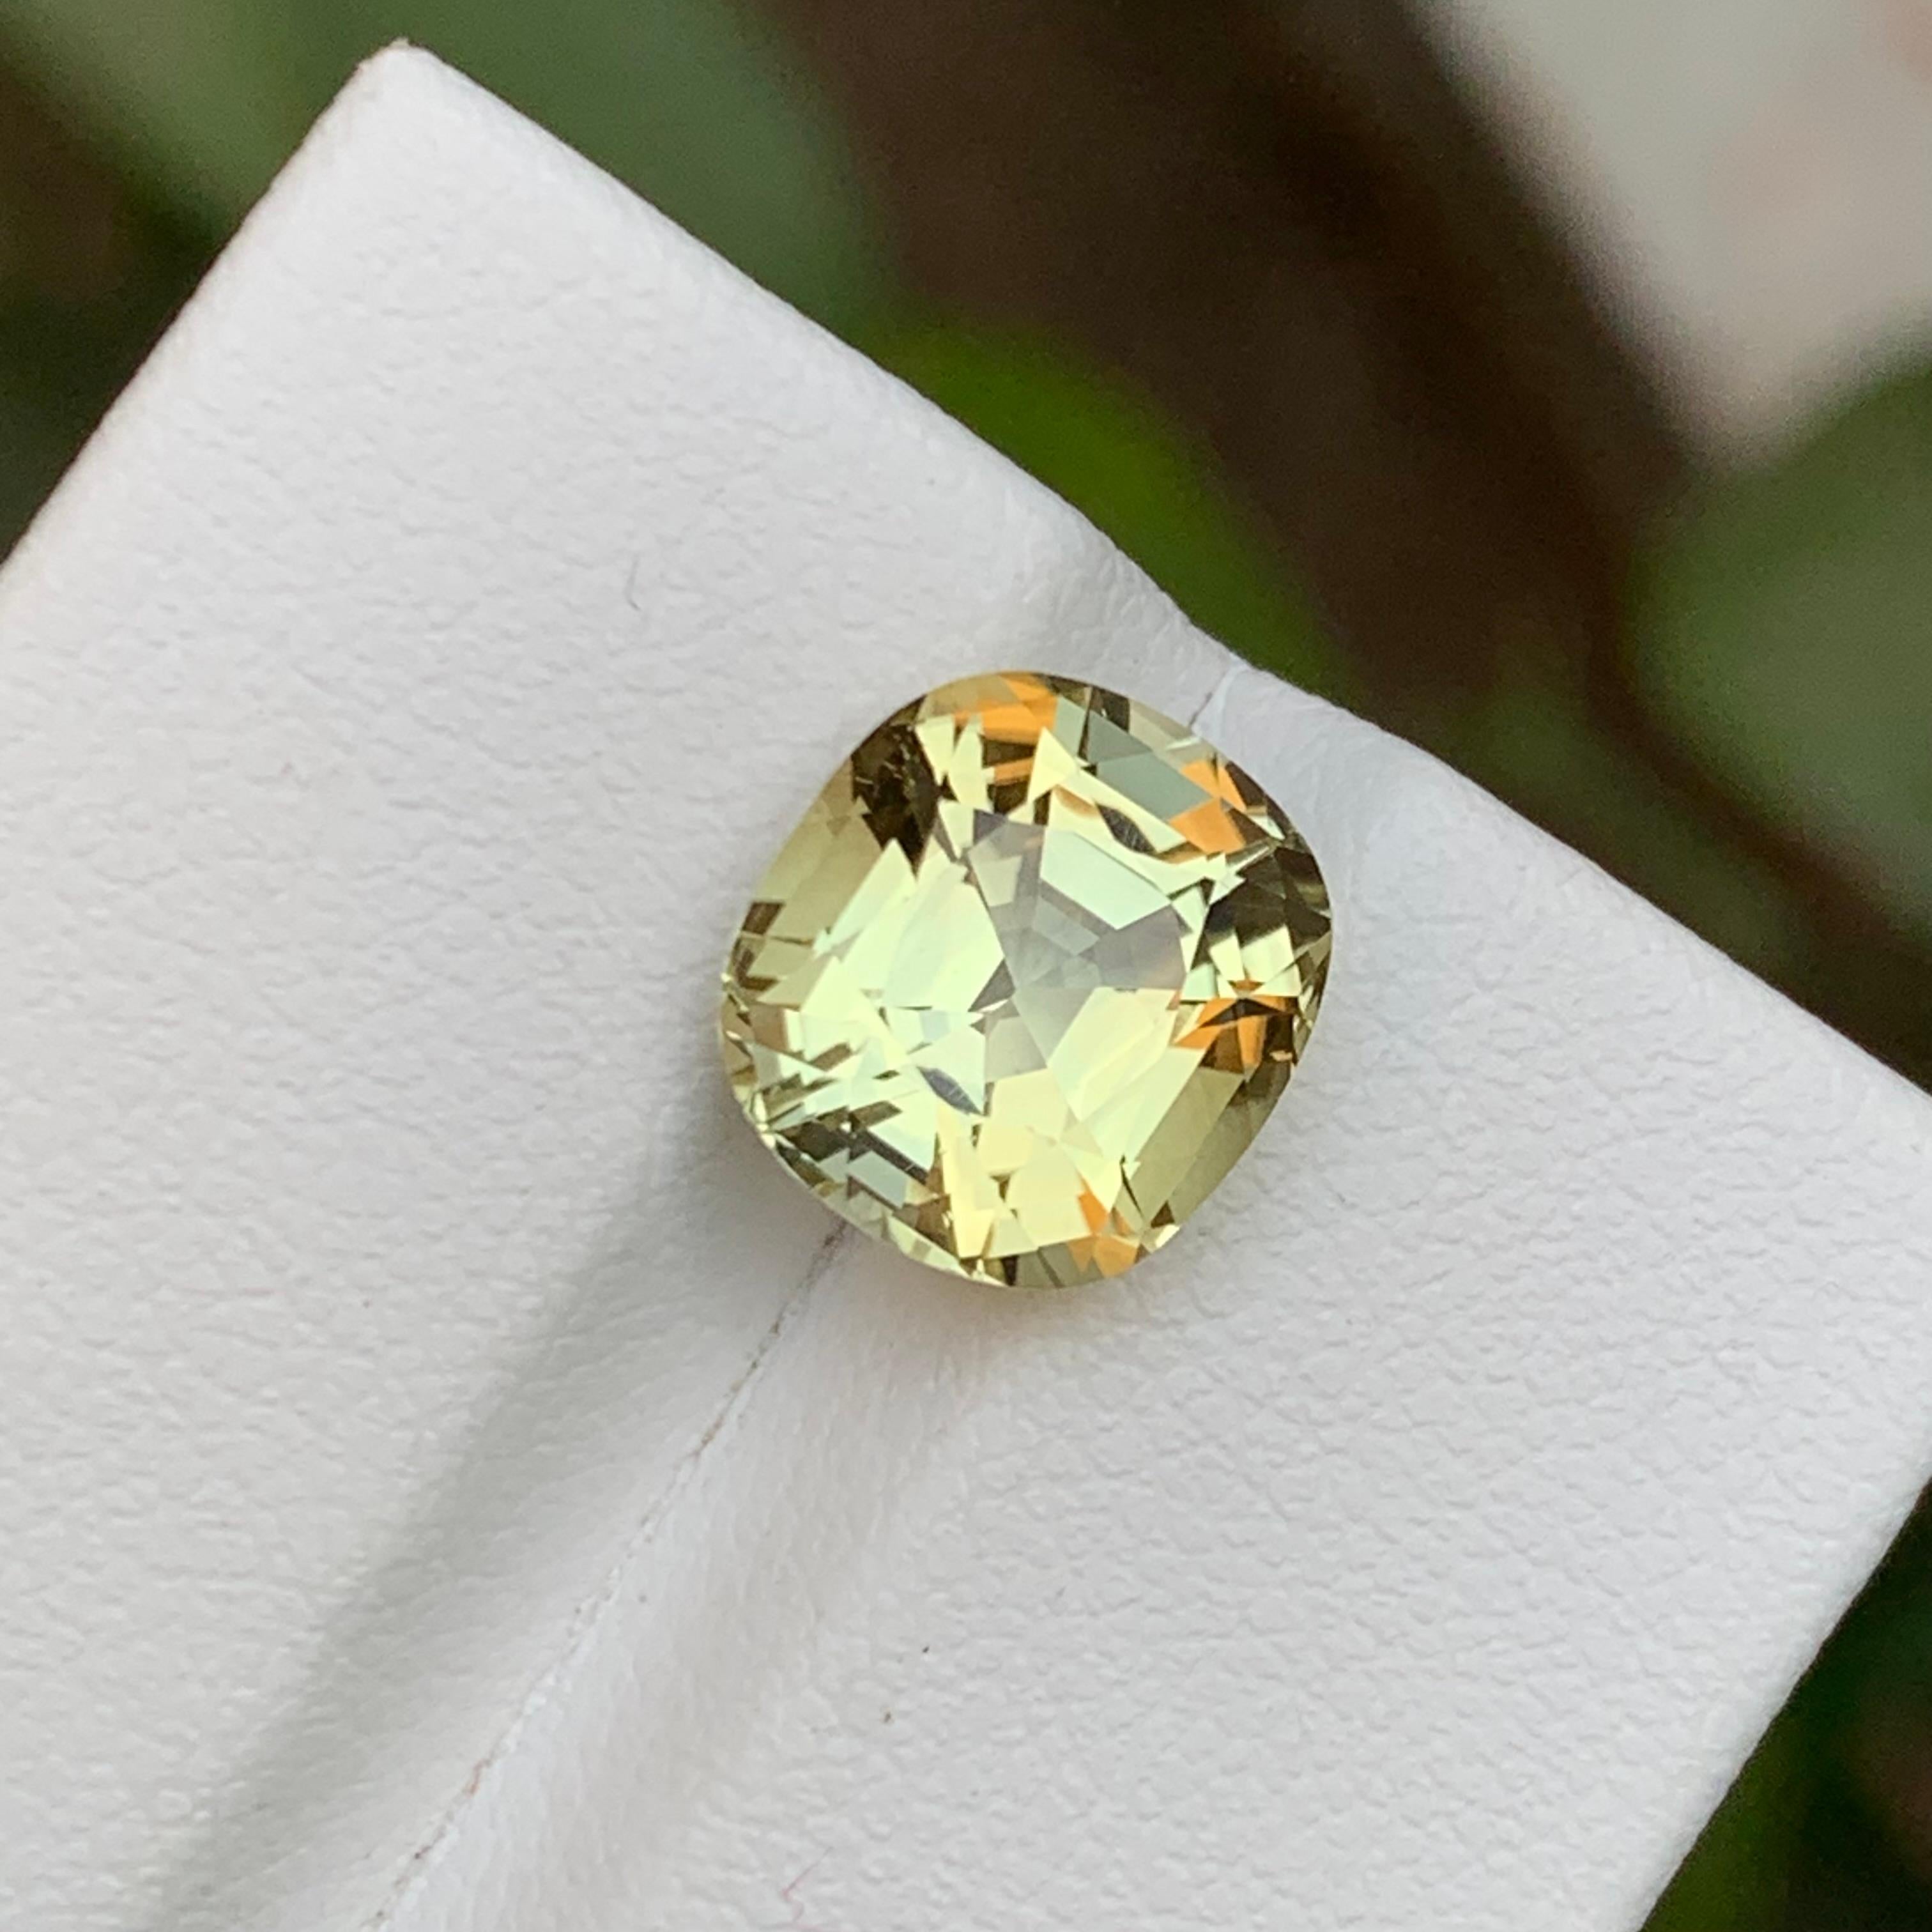 GEMSTONE TYPE: Tourmaline
PIECE(S): 1
WEIGHT: 4.15 Carat
SHAPE: Cushion
SIZE (MM):  9.97 x 9.24 x 6.79
COLOR: Light Golden Yellow
CLARITY: Eye Clean
TREATMENT: Not treated
ORIGIN: Afghanistan
CERTIFICATE: On demand

This dazzling 4.15 carat natural